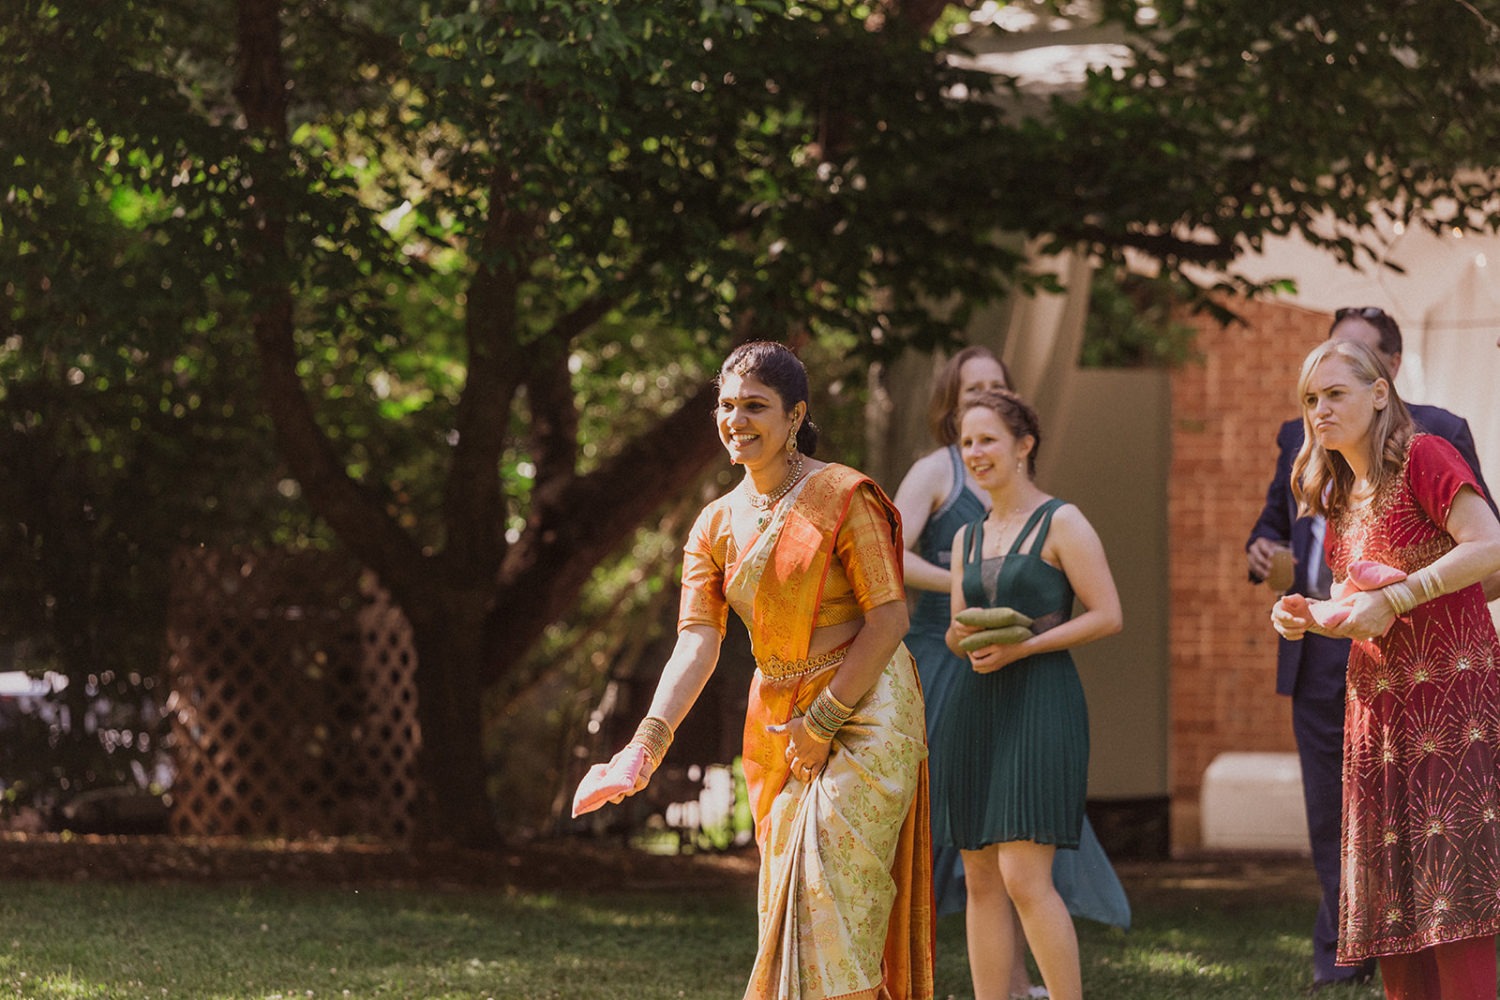 woman in indian clothing plays lawn game at outdoor maryland wedding